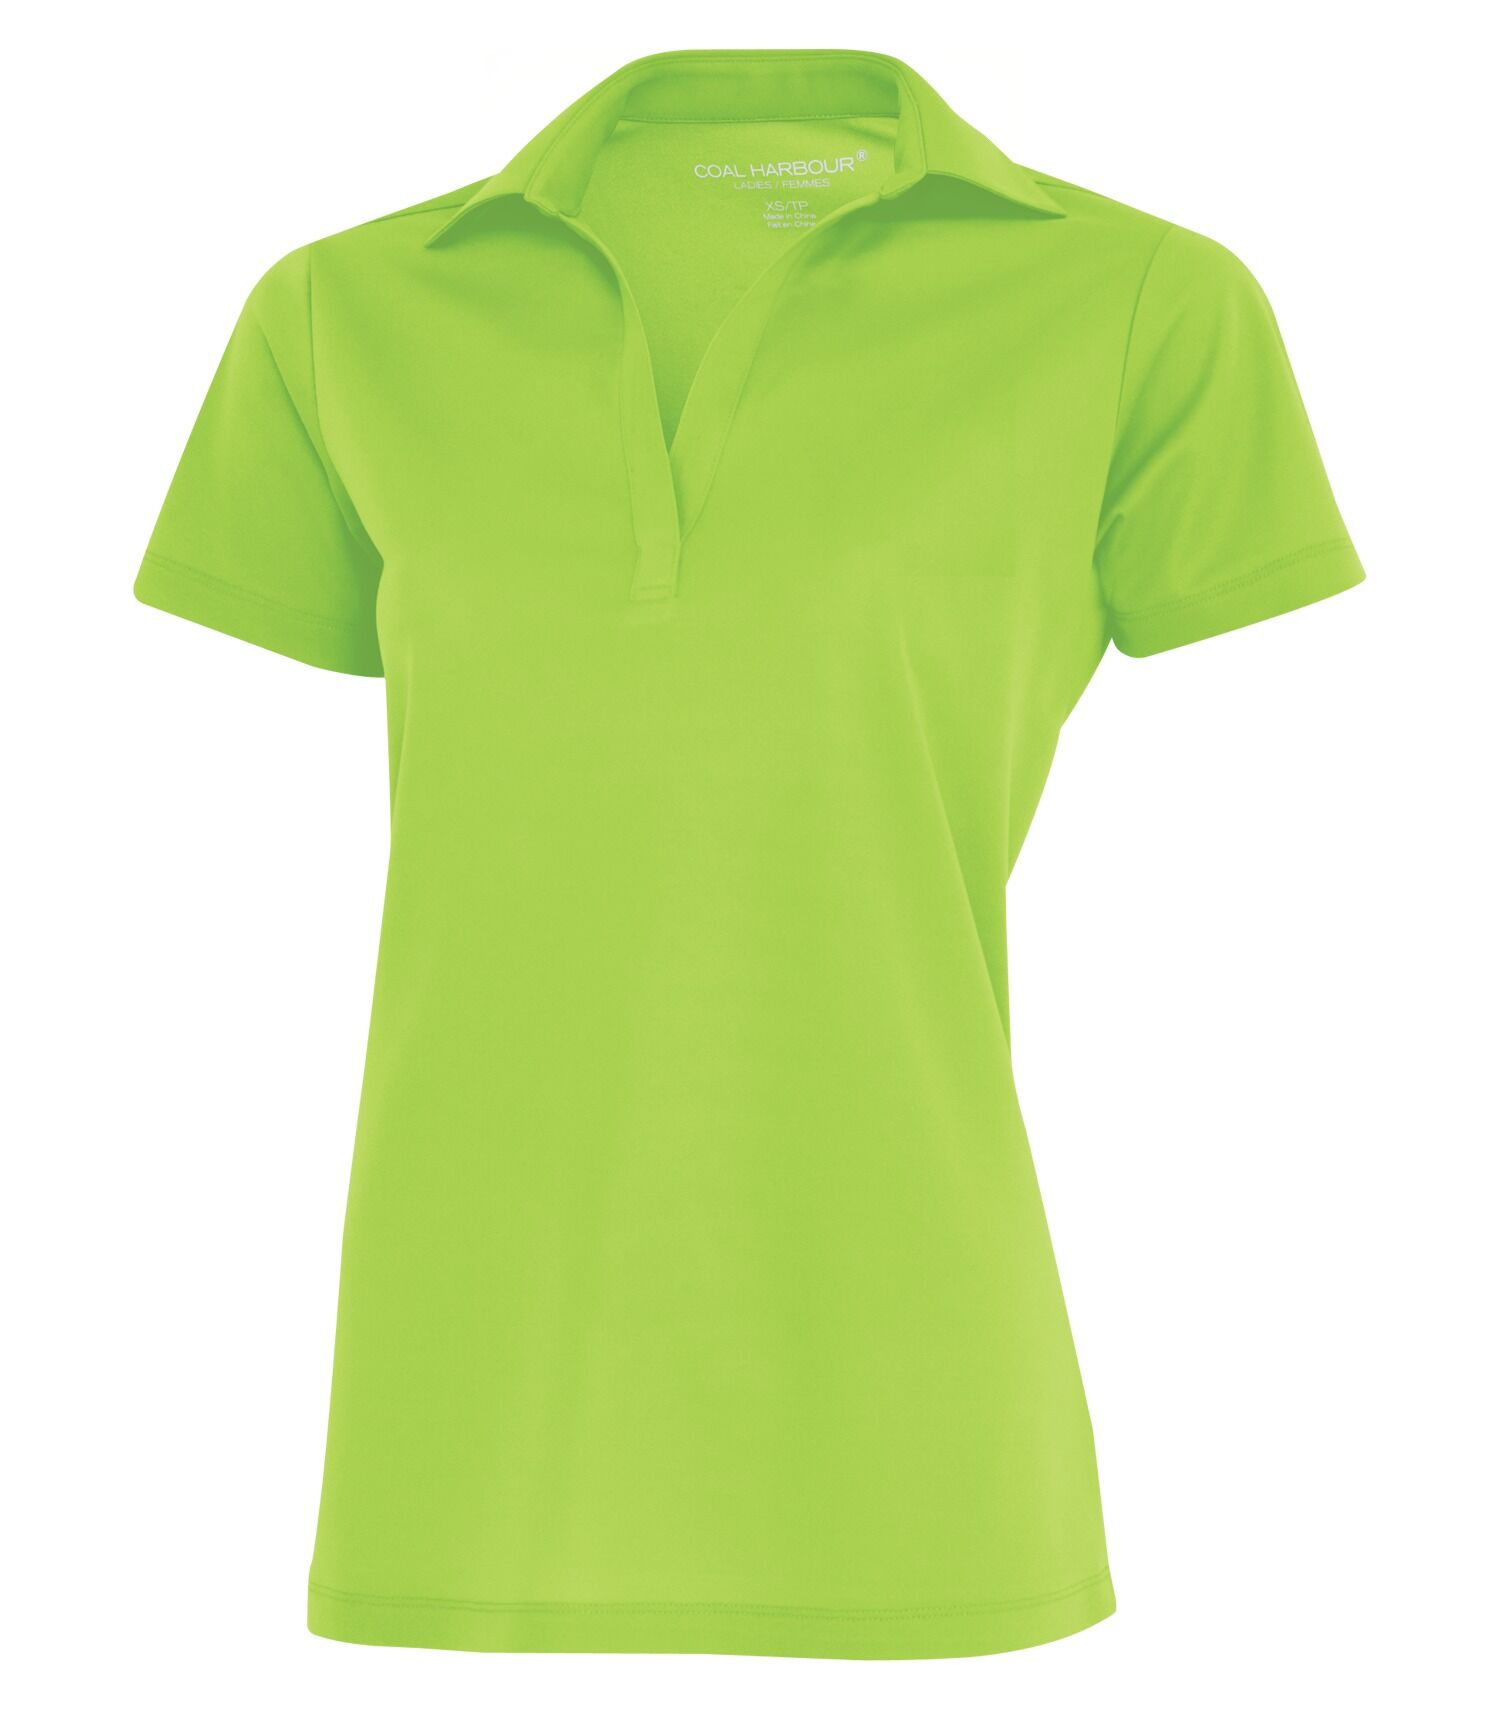 COAL HARBOUR LADIES EVERYDAY SPORT SHIRT #L4007 Lime Green